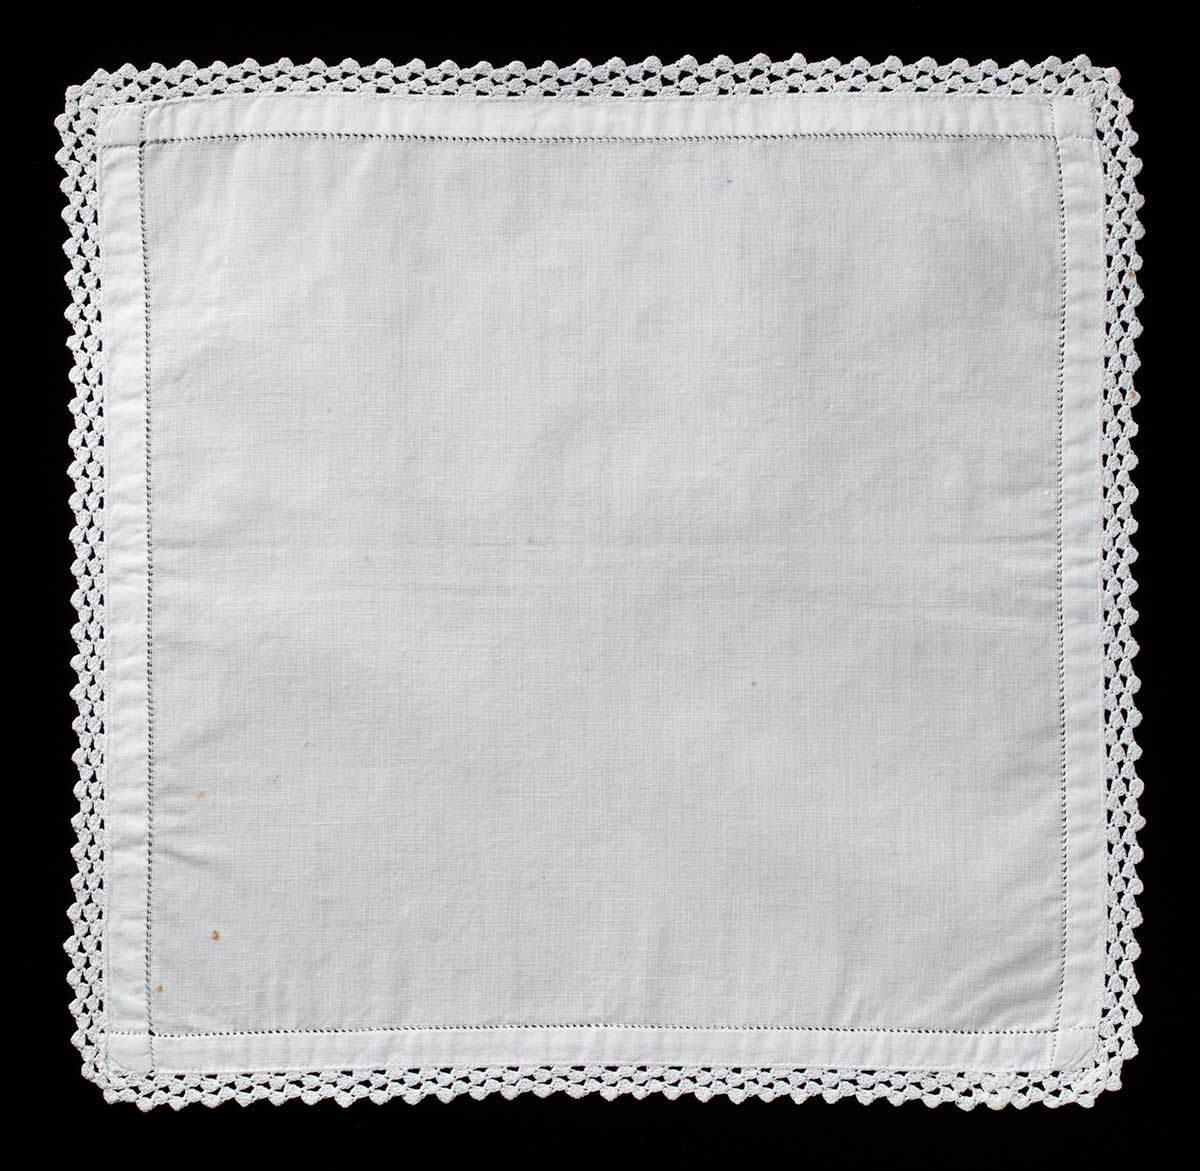 Square-shaped white woven handkerchief with fine crocheted detailing at the edges. - click to view larger image